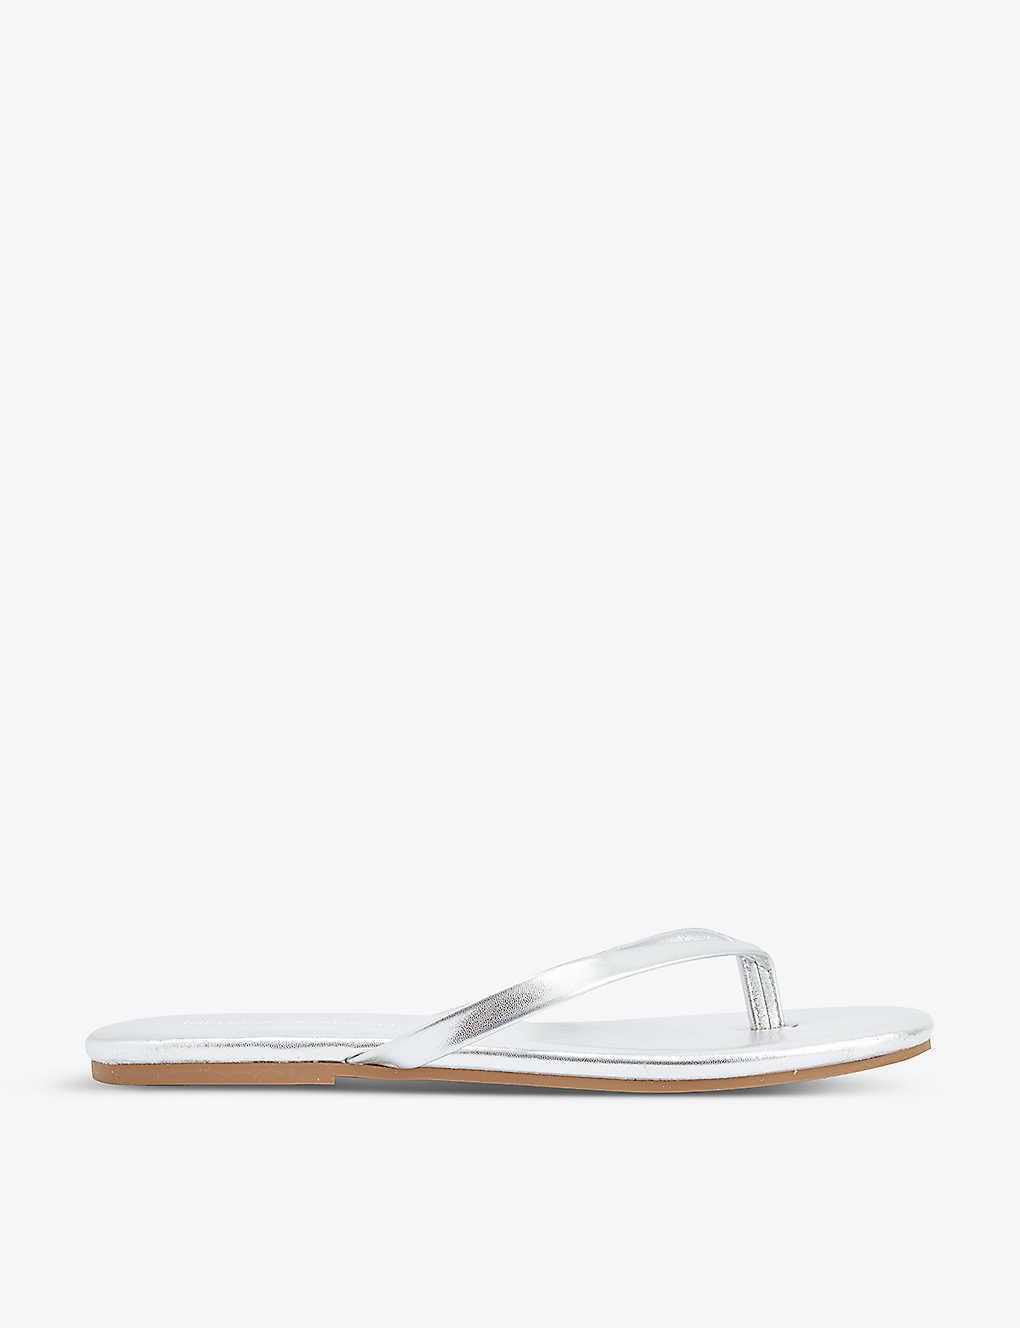 Melissa Odabash Branded Leather Sandals in White | Lyst